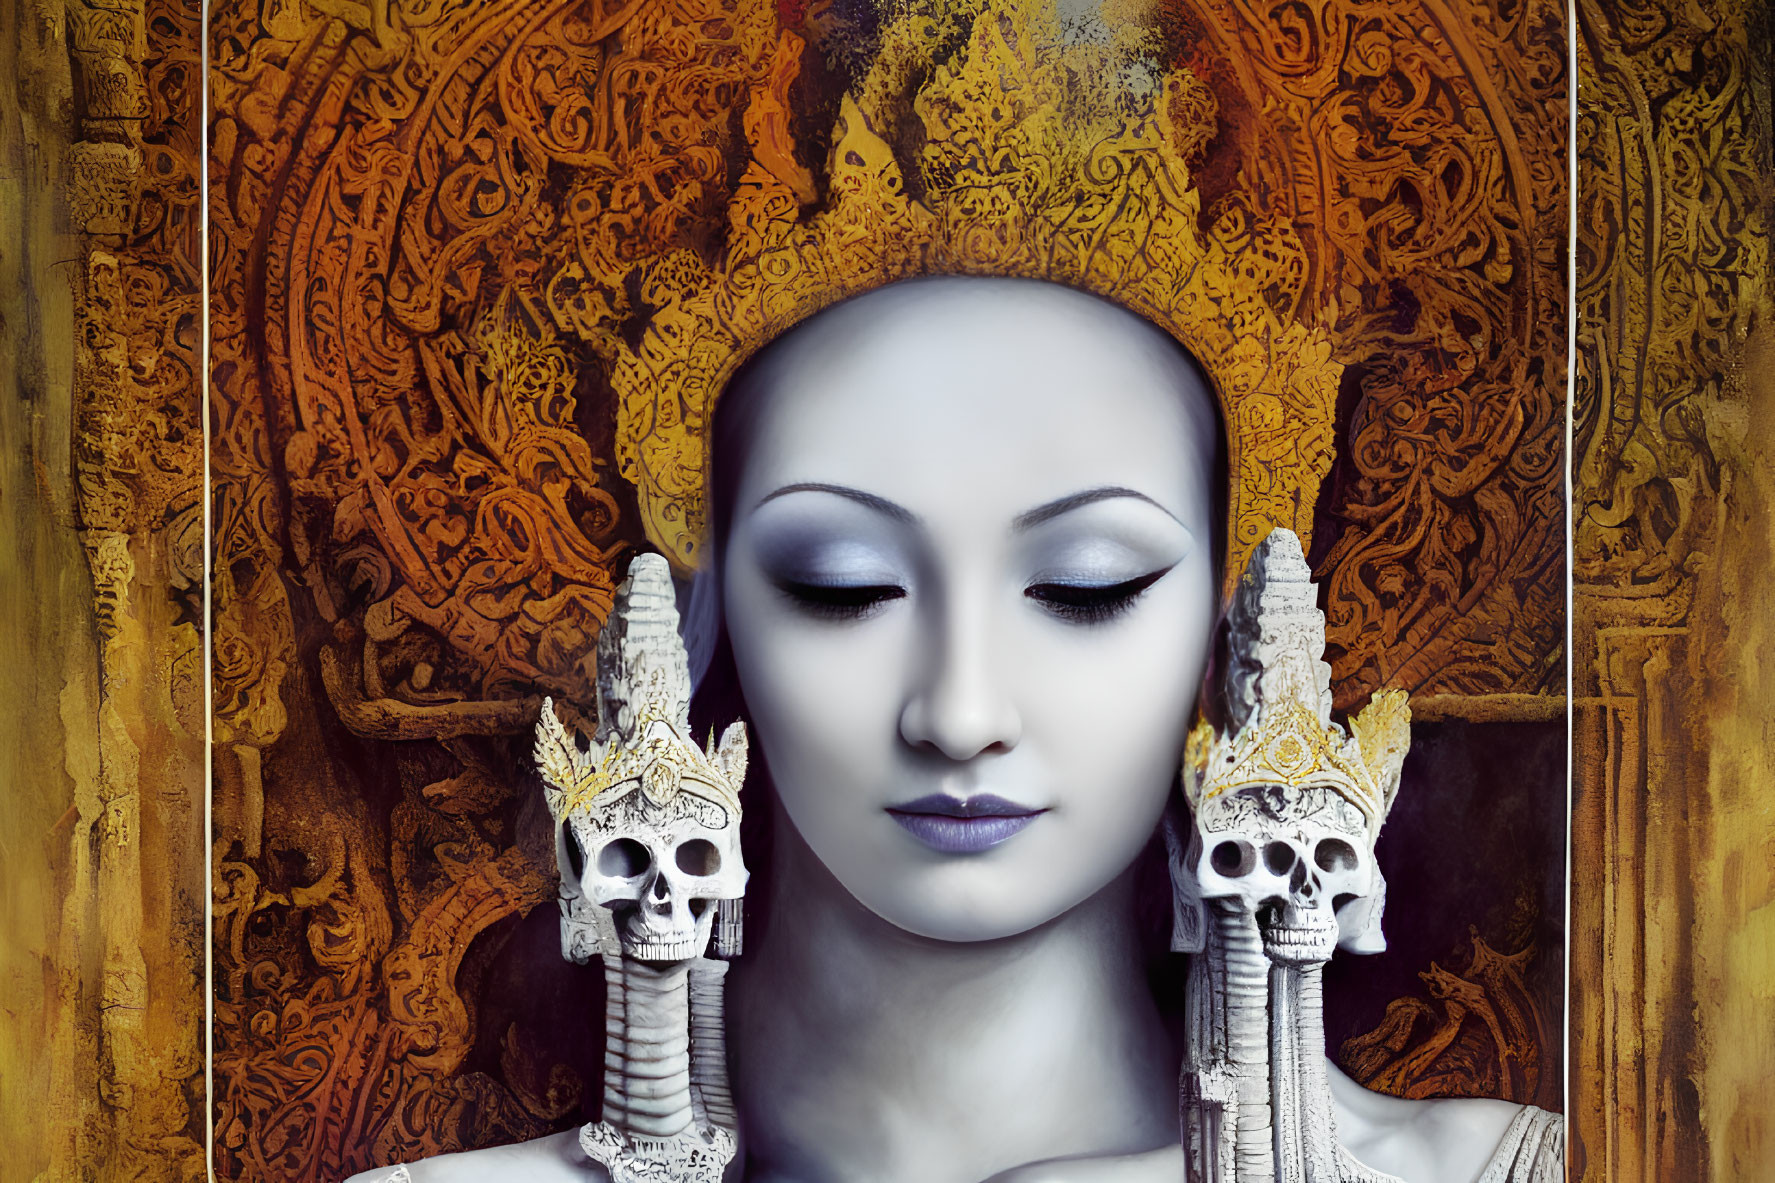 Portrait of a serene woman with dragon sculptures and golden patterns